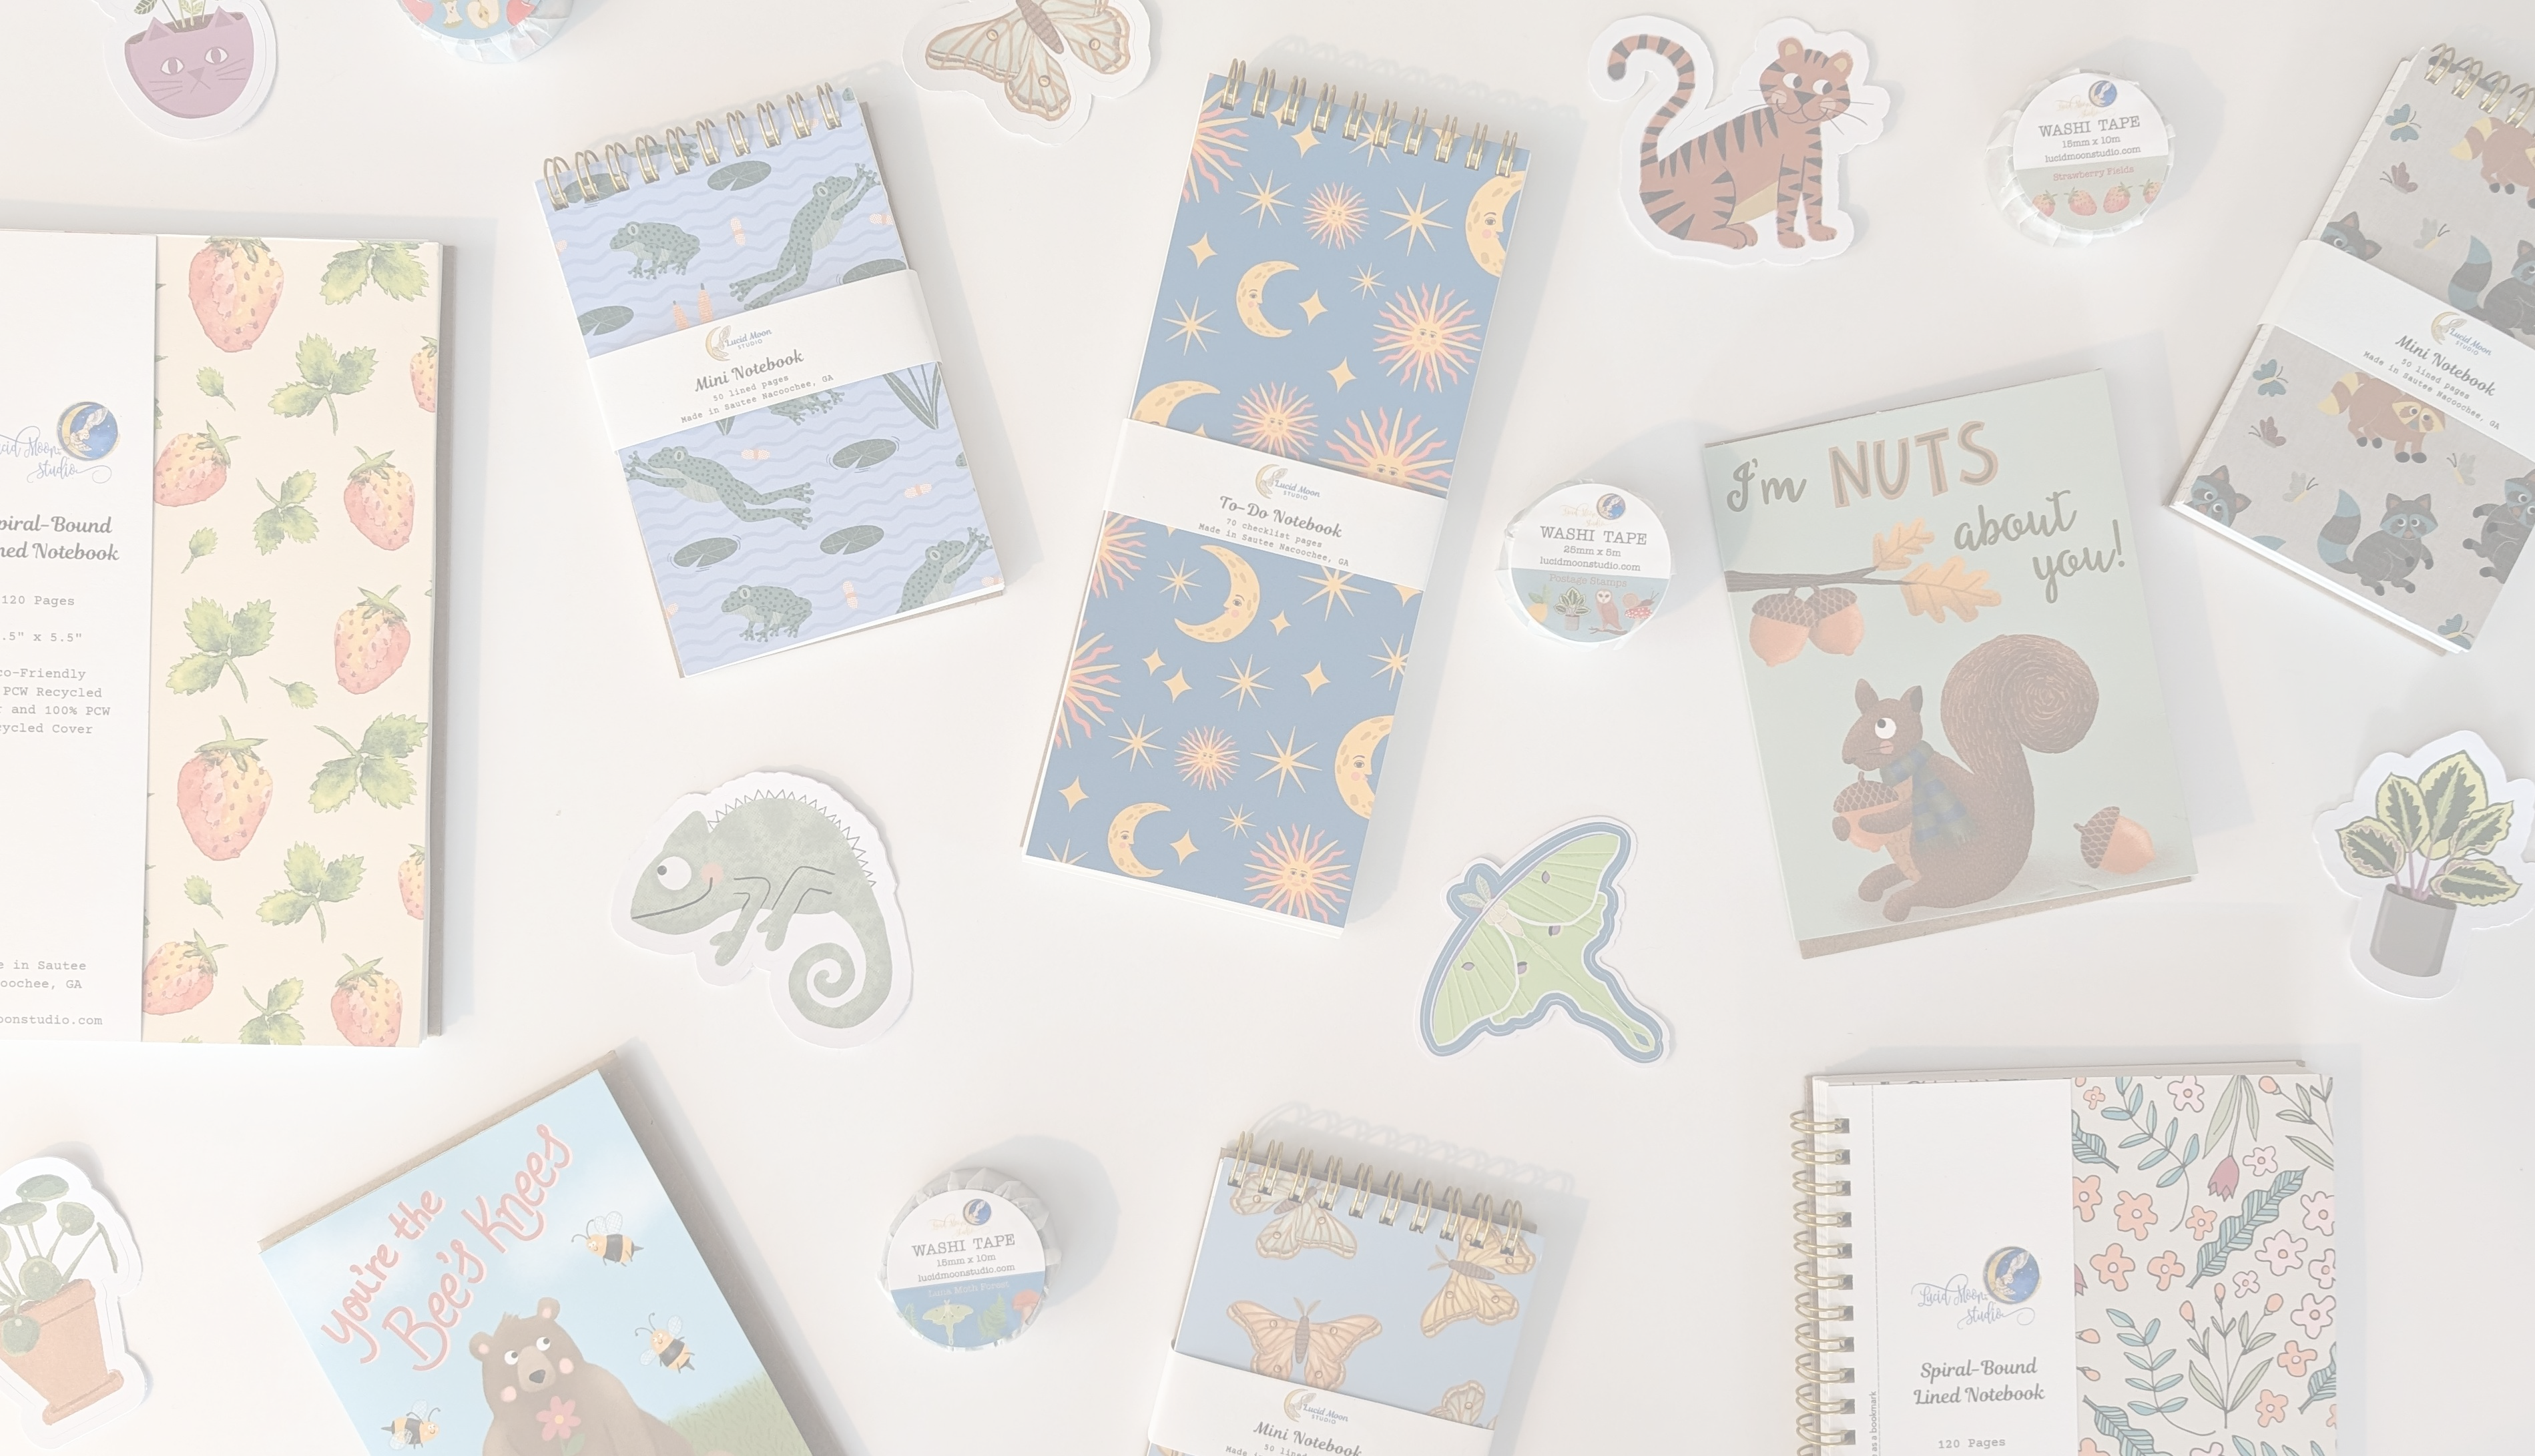 A photo of a variety of Lucid Moon Studio products including spiral-bound notebooks, jotters, greeting cards, washi tape, and stickers with whimsical designs drawn by Lisa Petrillo.